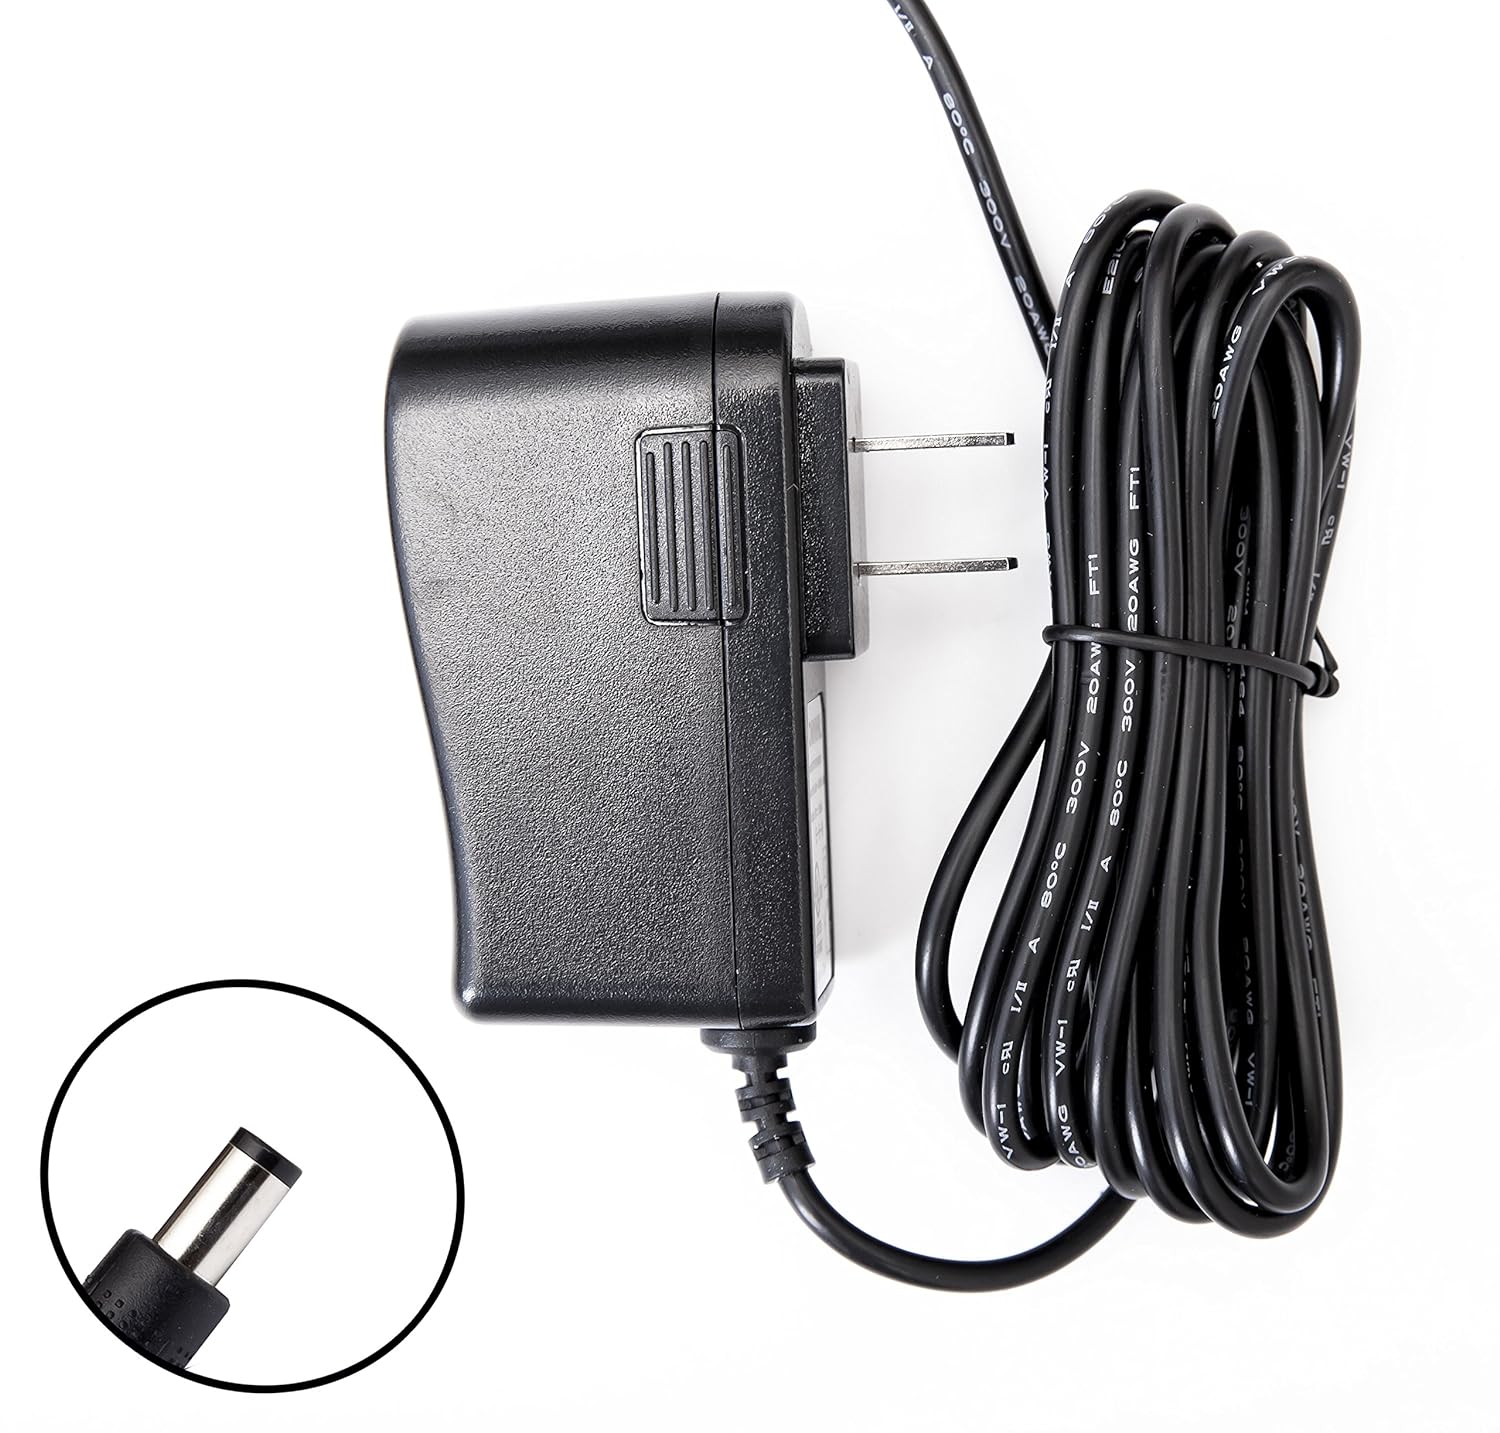 OMNIHIL 8 Foot Long  AC/DC Adapter for Moog Minifooger Overdrive Pedal Replacement Power Supply